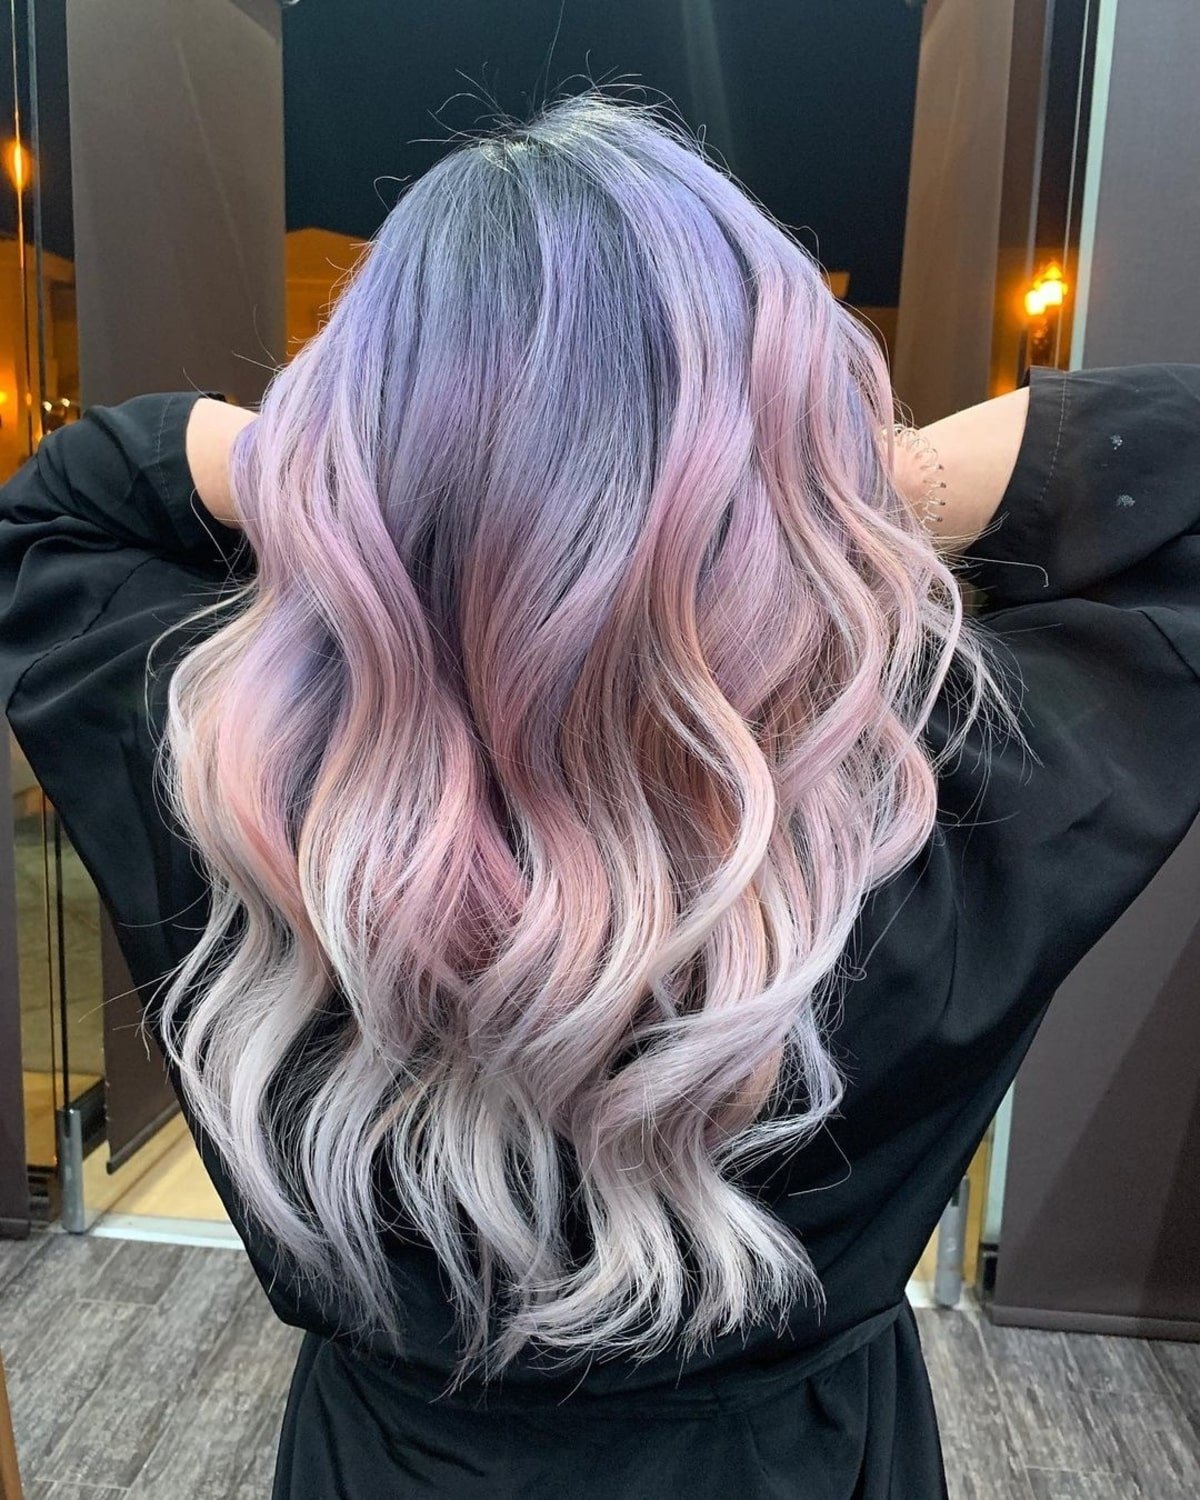 Light pink and purple hair